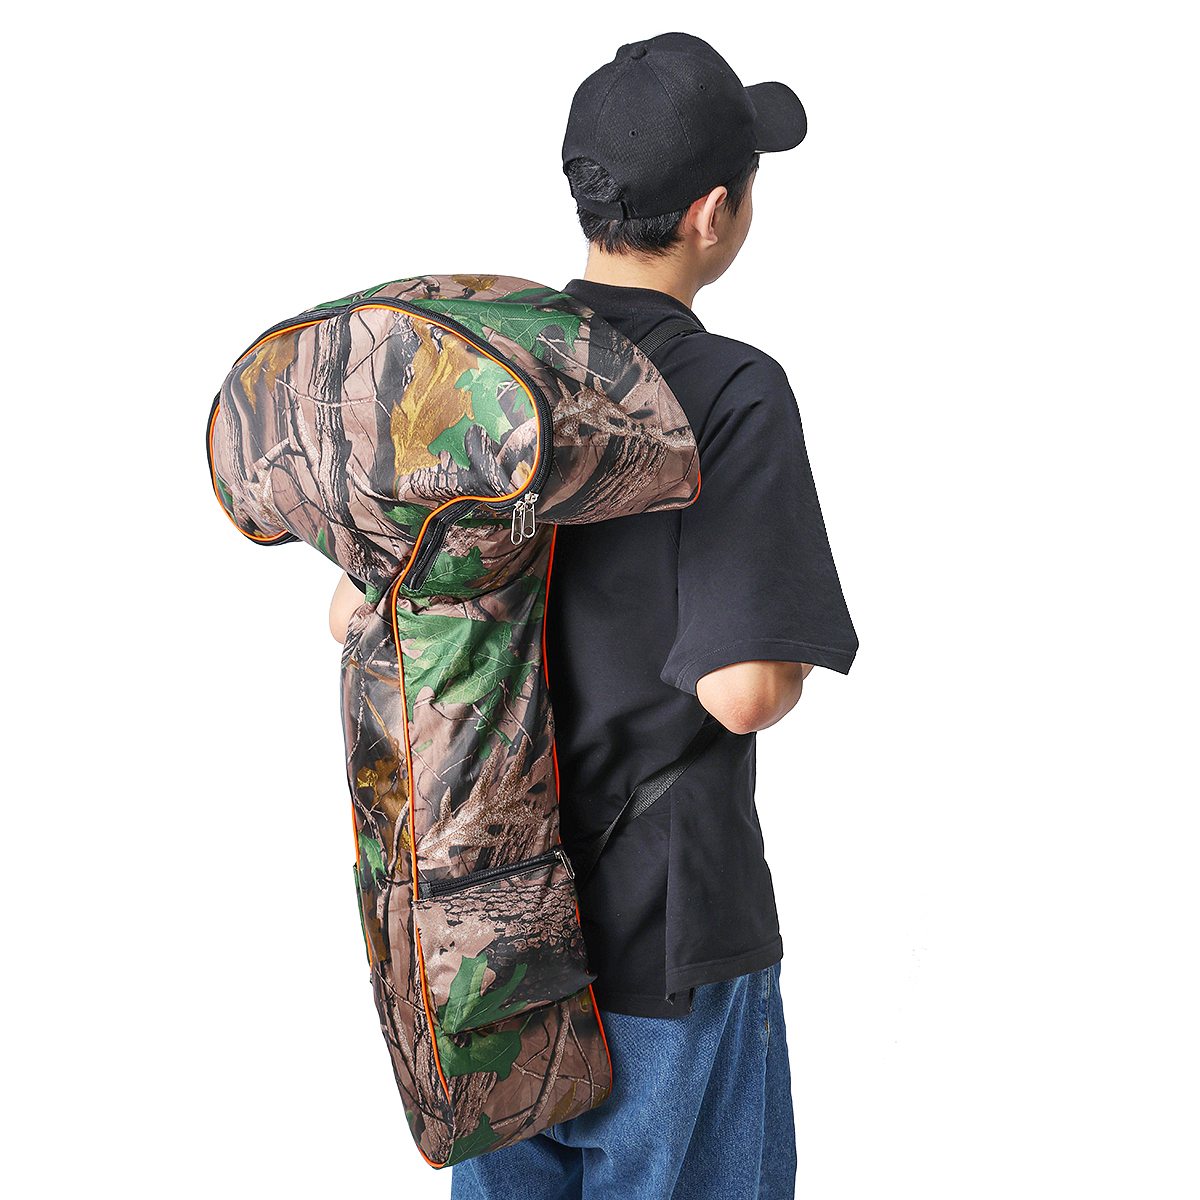 T-Shape-Outdoor-Archery-Cross-Bow-Bag-Sports-Tactical-ShoulderStorage-Case-Pouch-Camping-Hiking-1471086-10